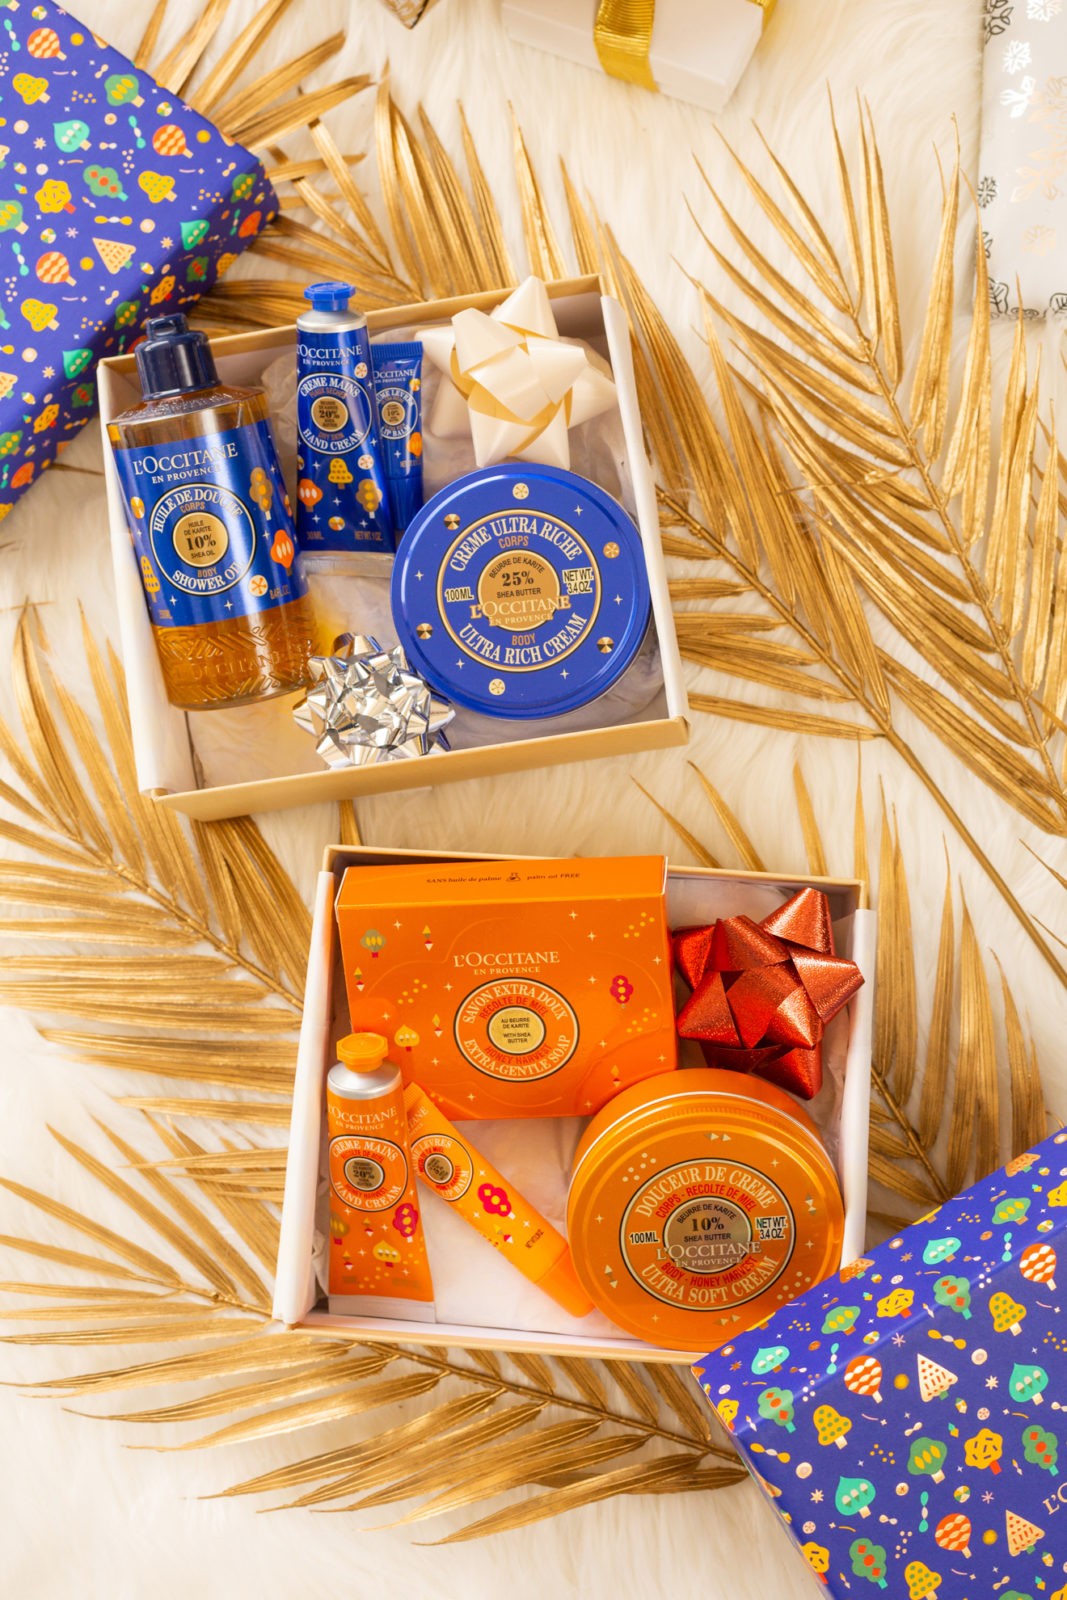 Gift Ideas for the Woman Who Has Everything by Lifestyle Blogger Laura Lily, L'Occitane skincare gift sets |  Gift Ideas for the Woman Who Has Everything by popular Los Angeles life and style blogger, Laura Lily: image of L'Occitane gift sets.